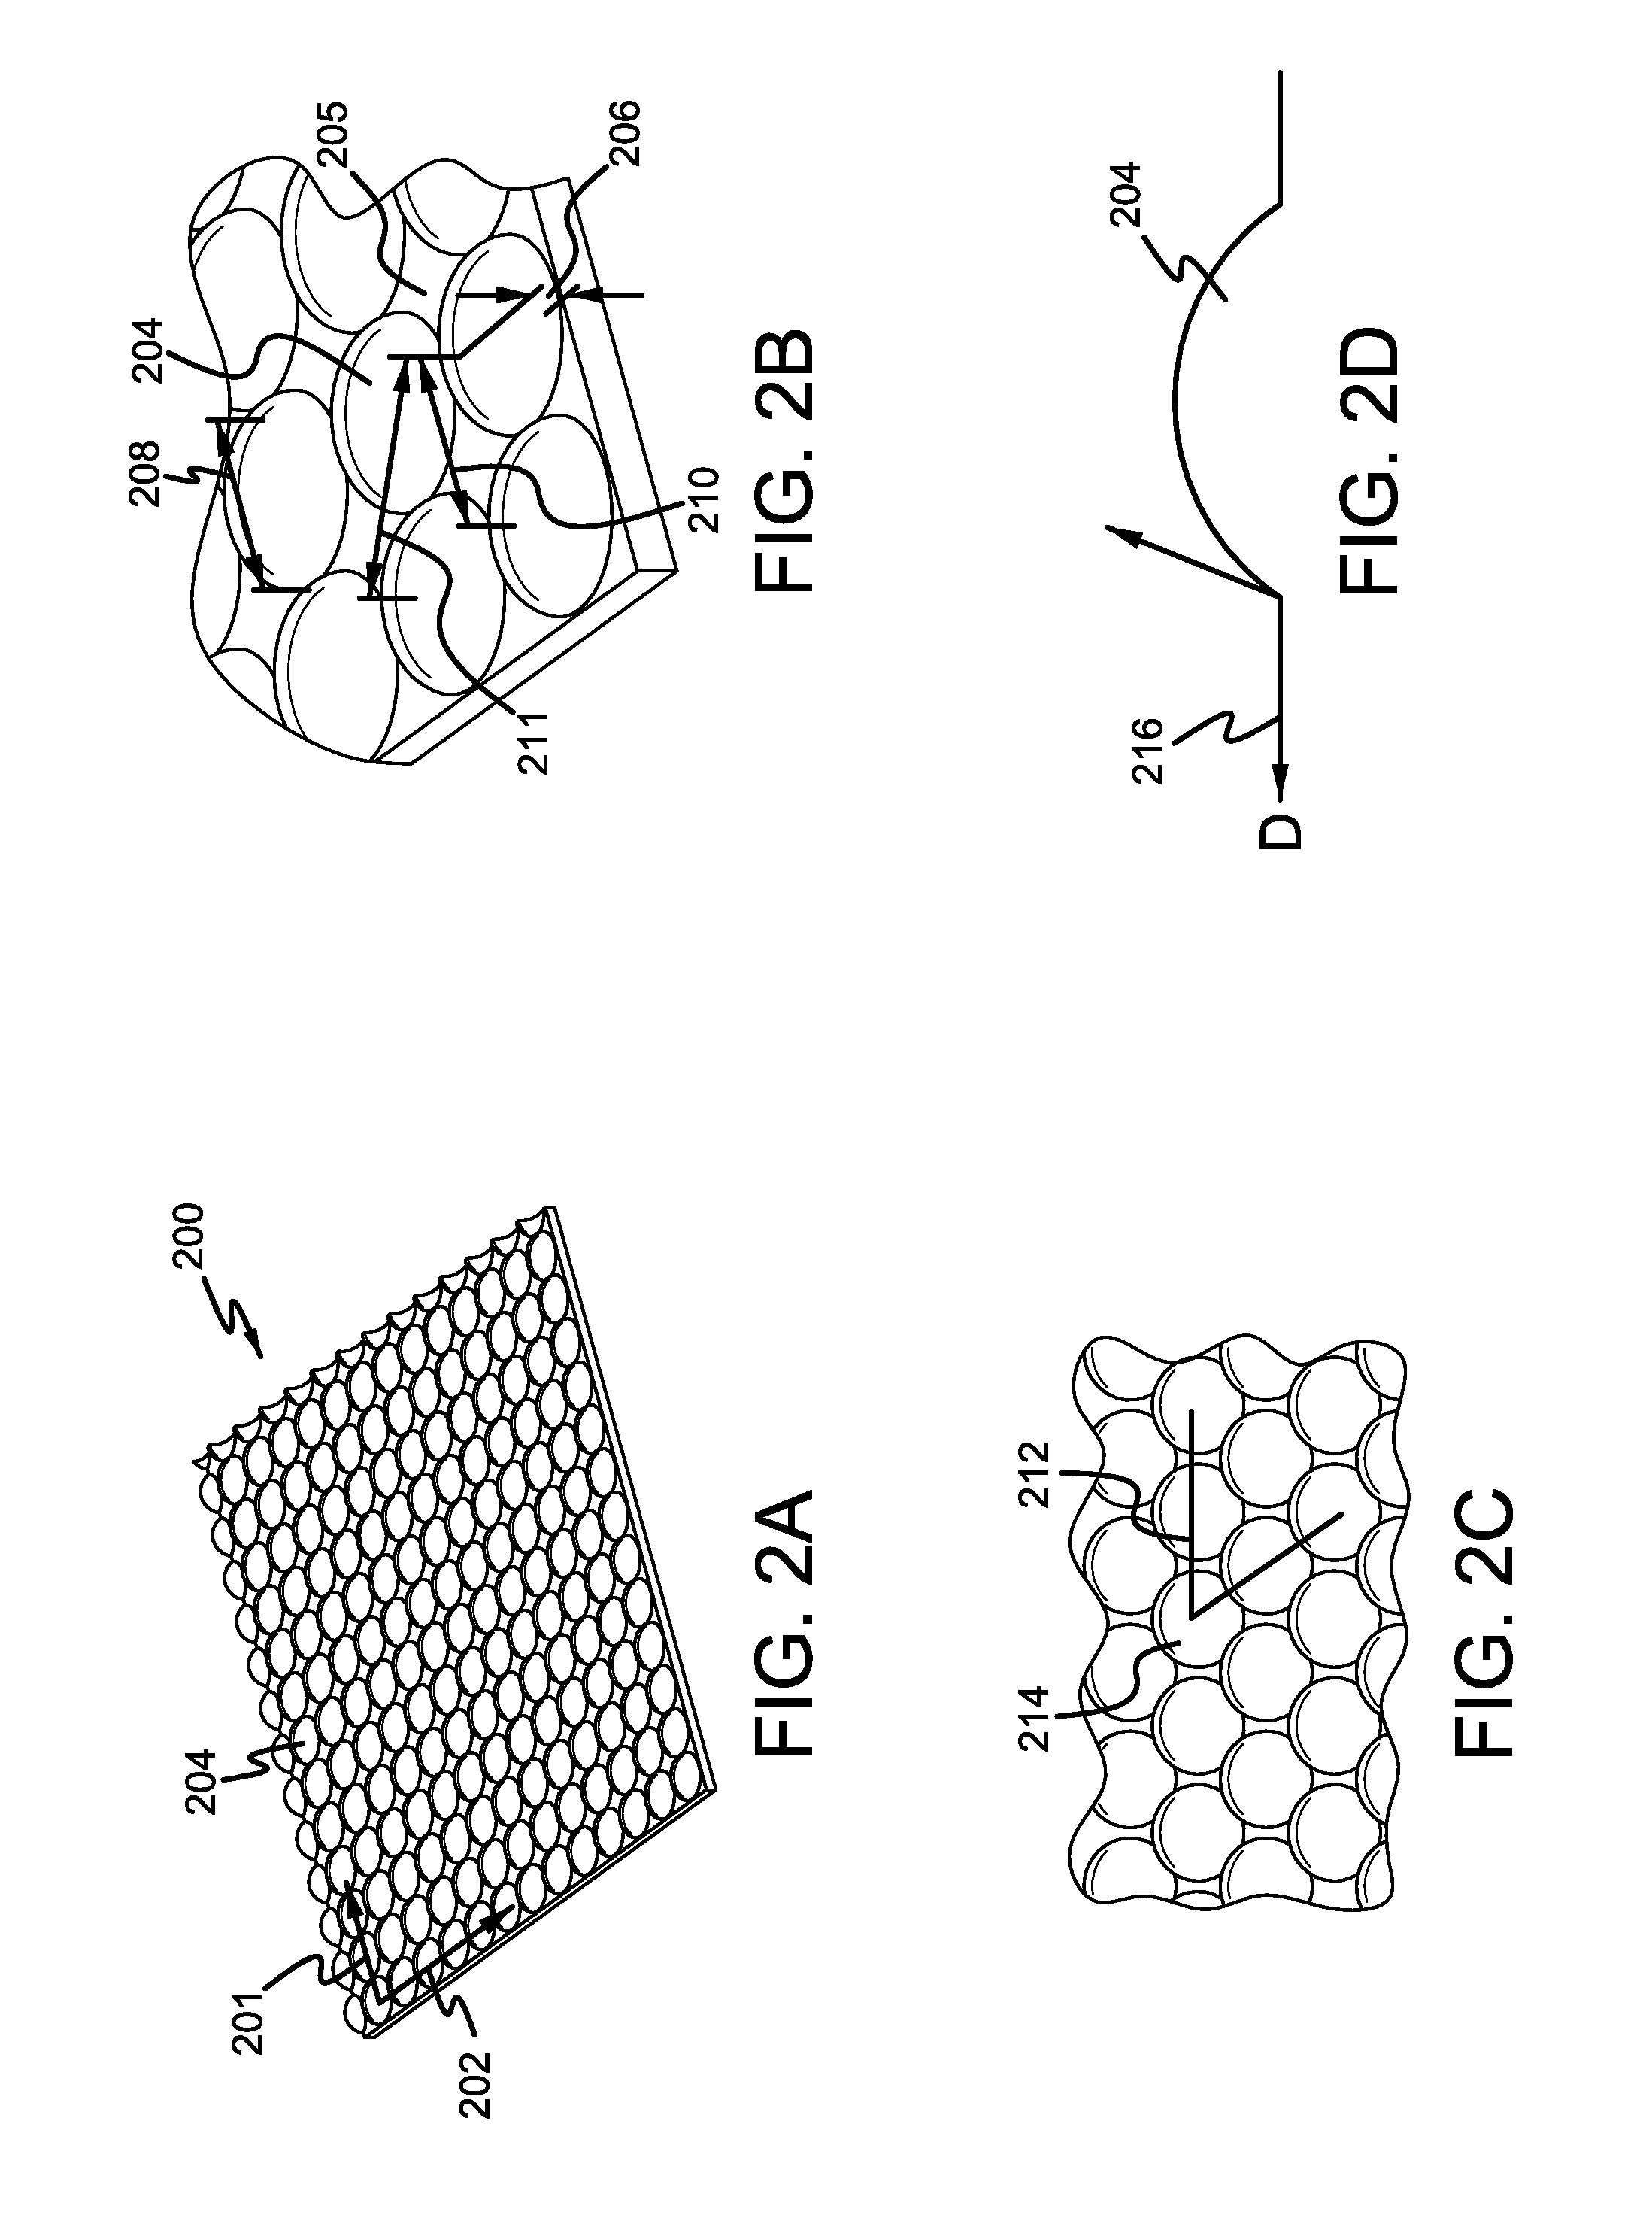 Structure to reduce noise and vibration in an engine system